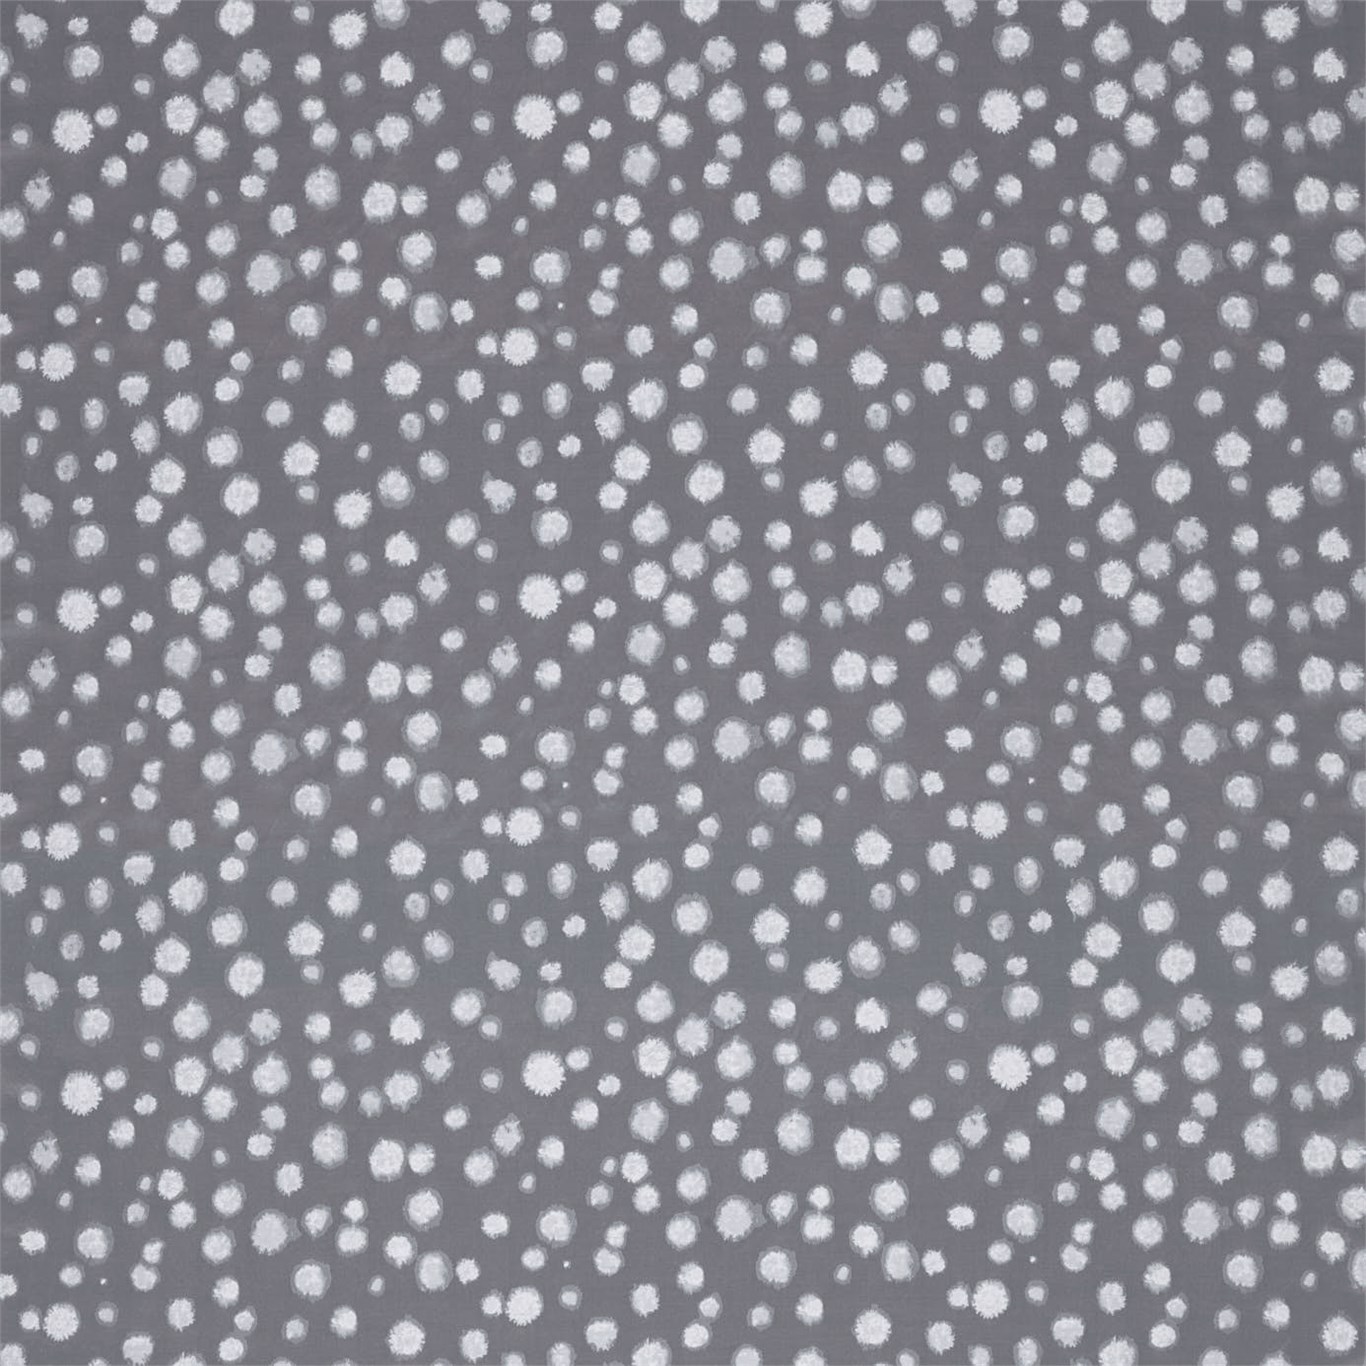 Mottle Charcoal Fabric by HAR